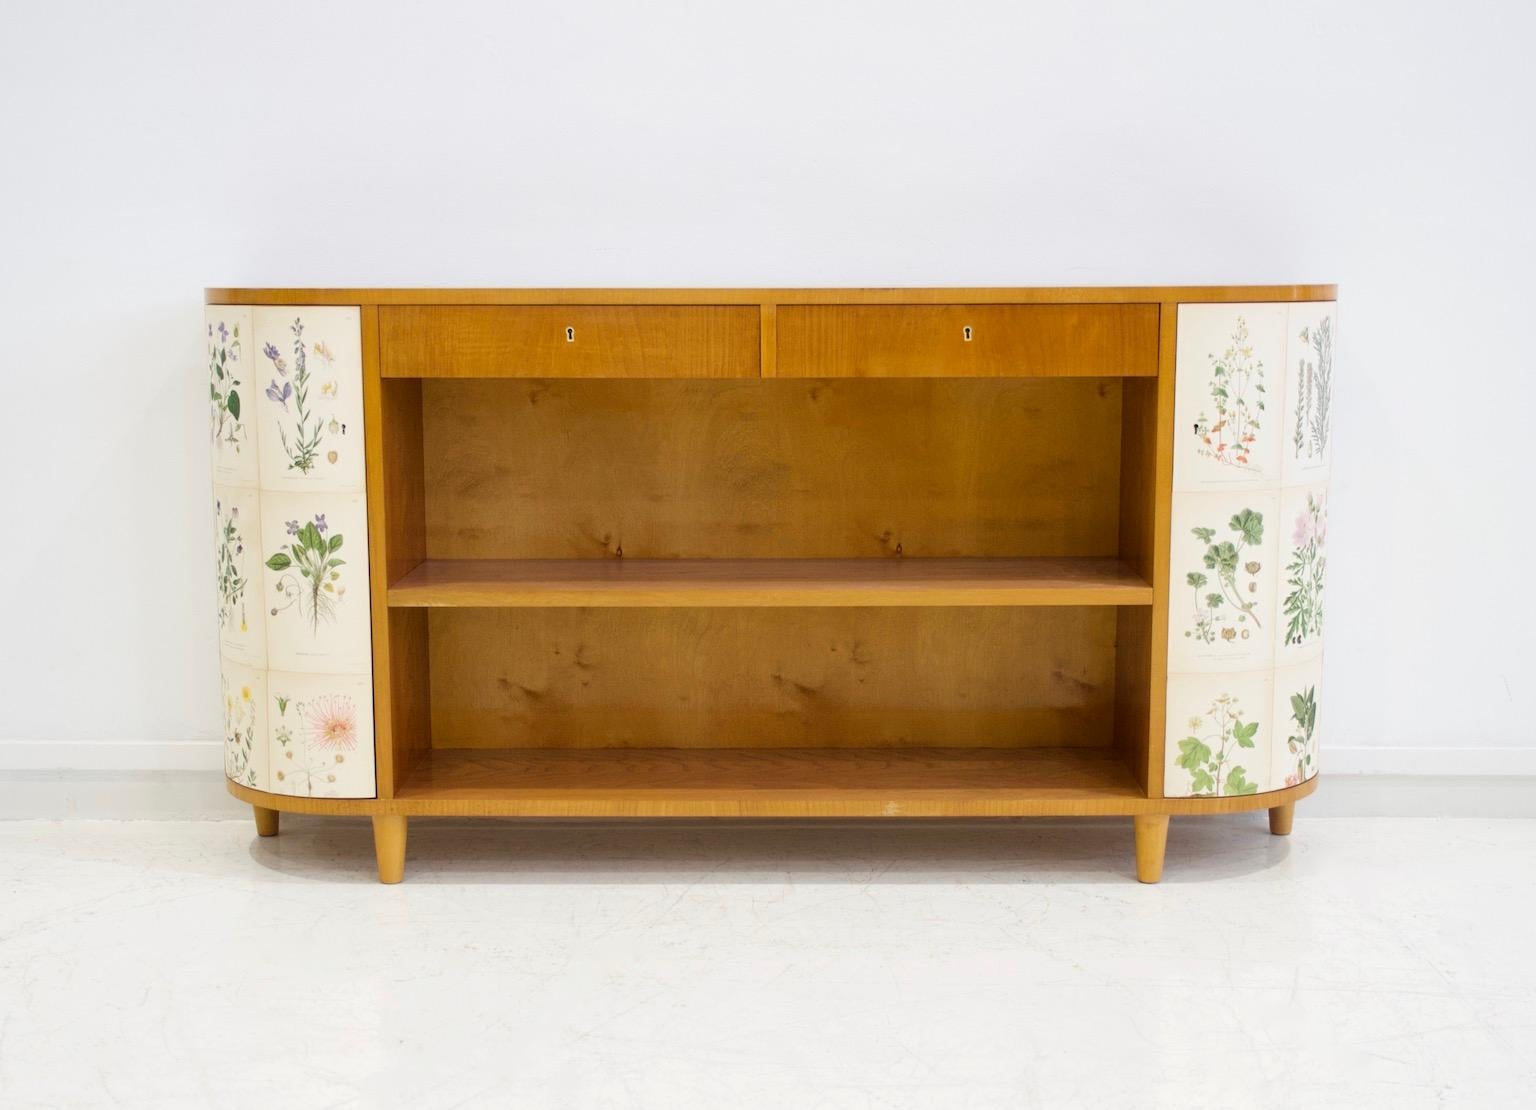 Cabinet / bookcase veneered with elm wood from circa 1940's. Two long shelves and two drawers on top, sides with doors behind which are shelves. Later covered with flower illustrated paper. The prints are from the book 